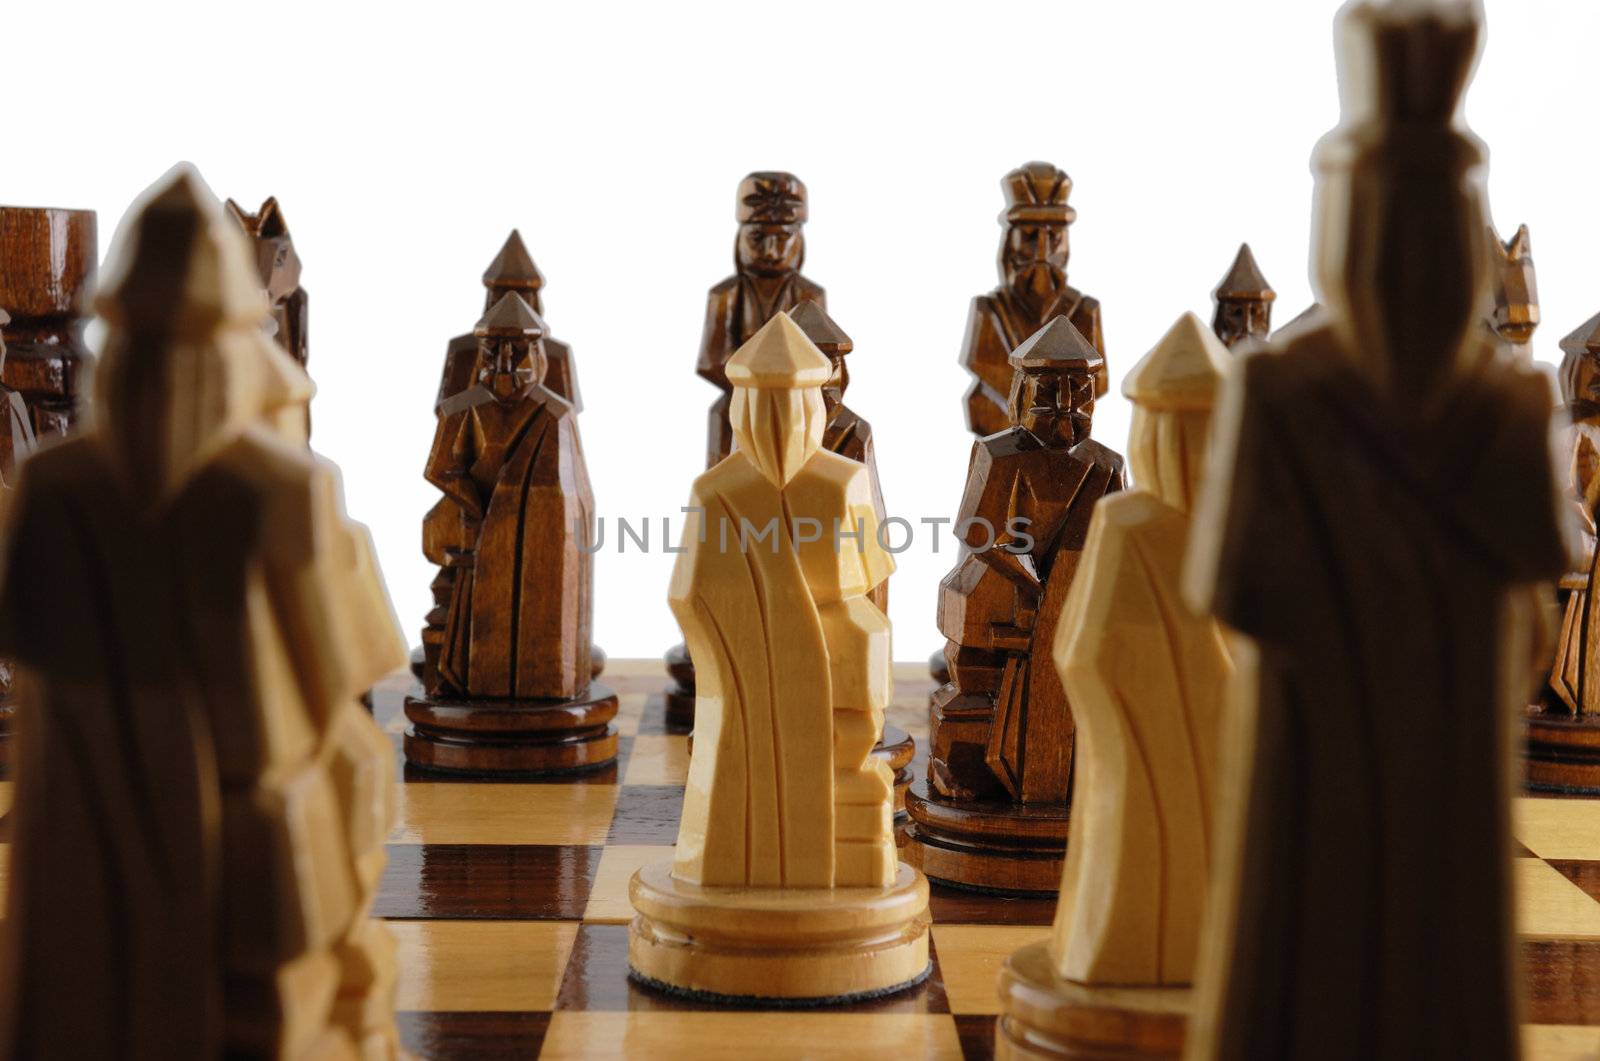 pawn messenger. The placed party from chessmen. Figures - from a tree, manual work